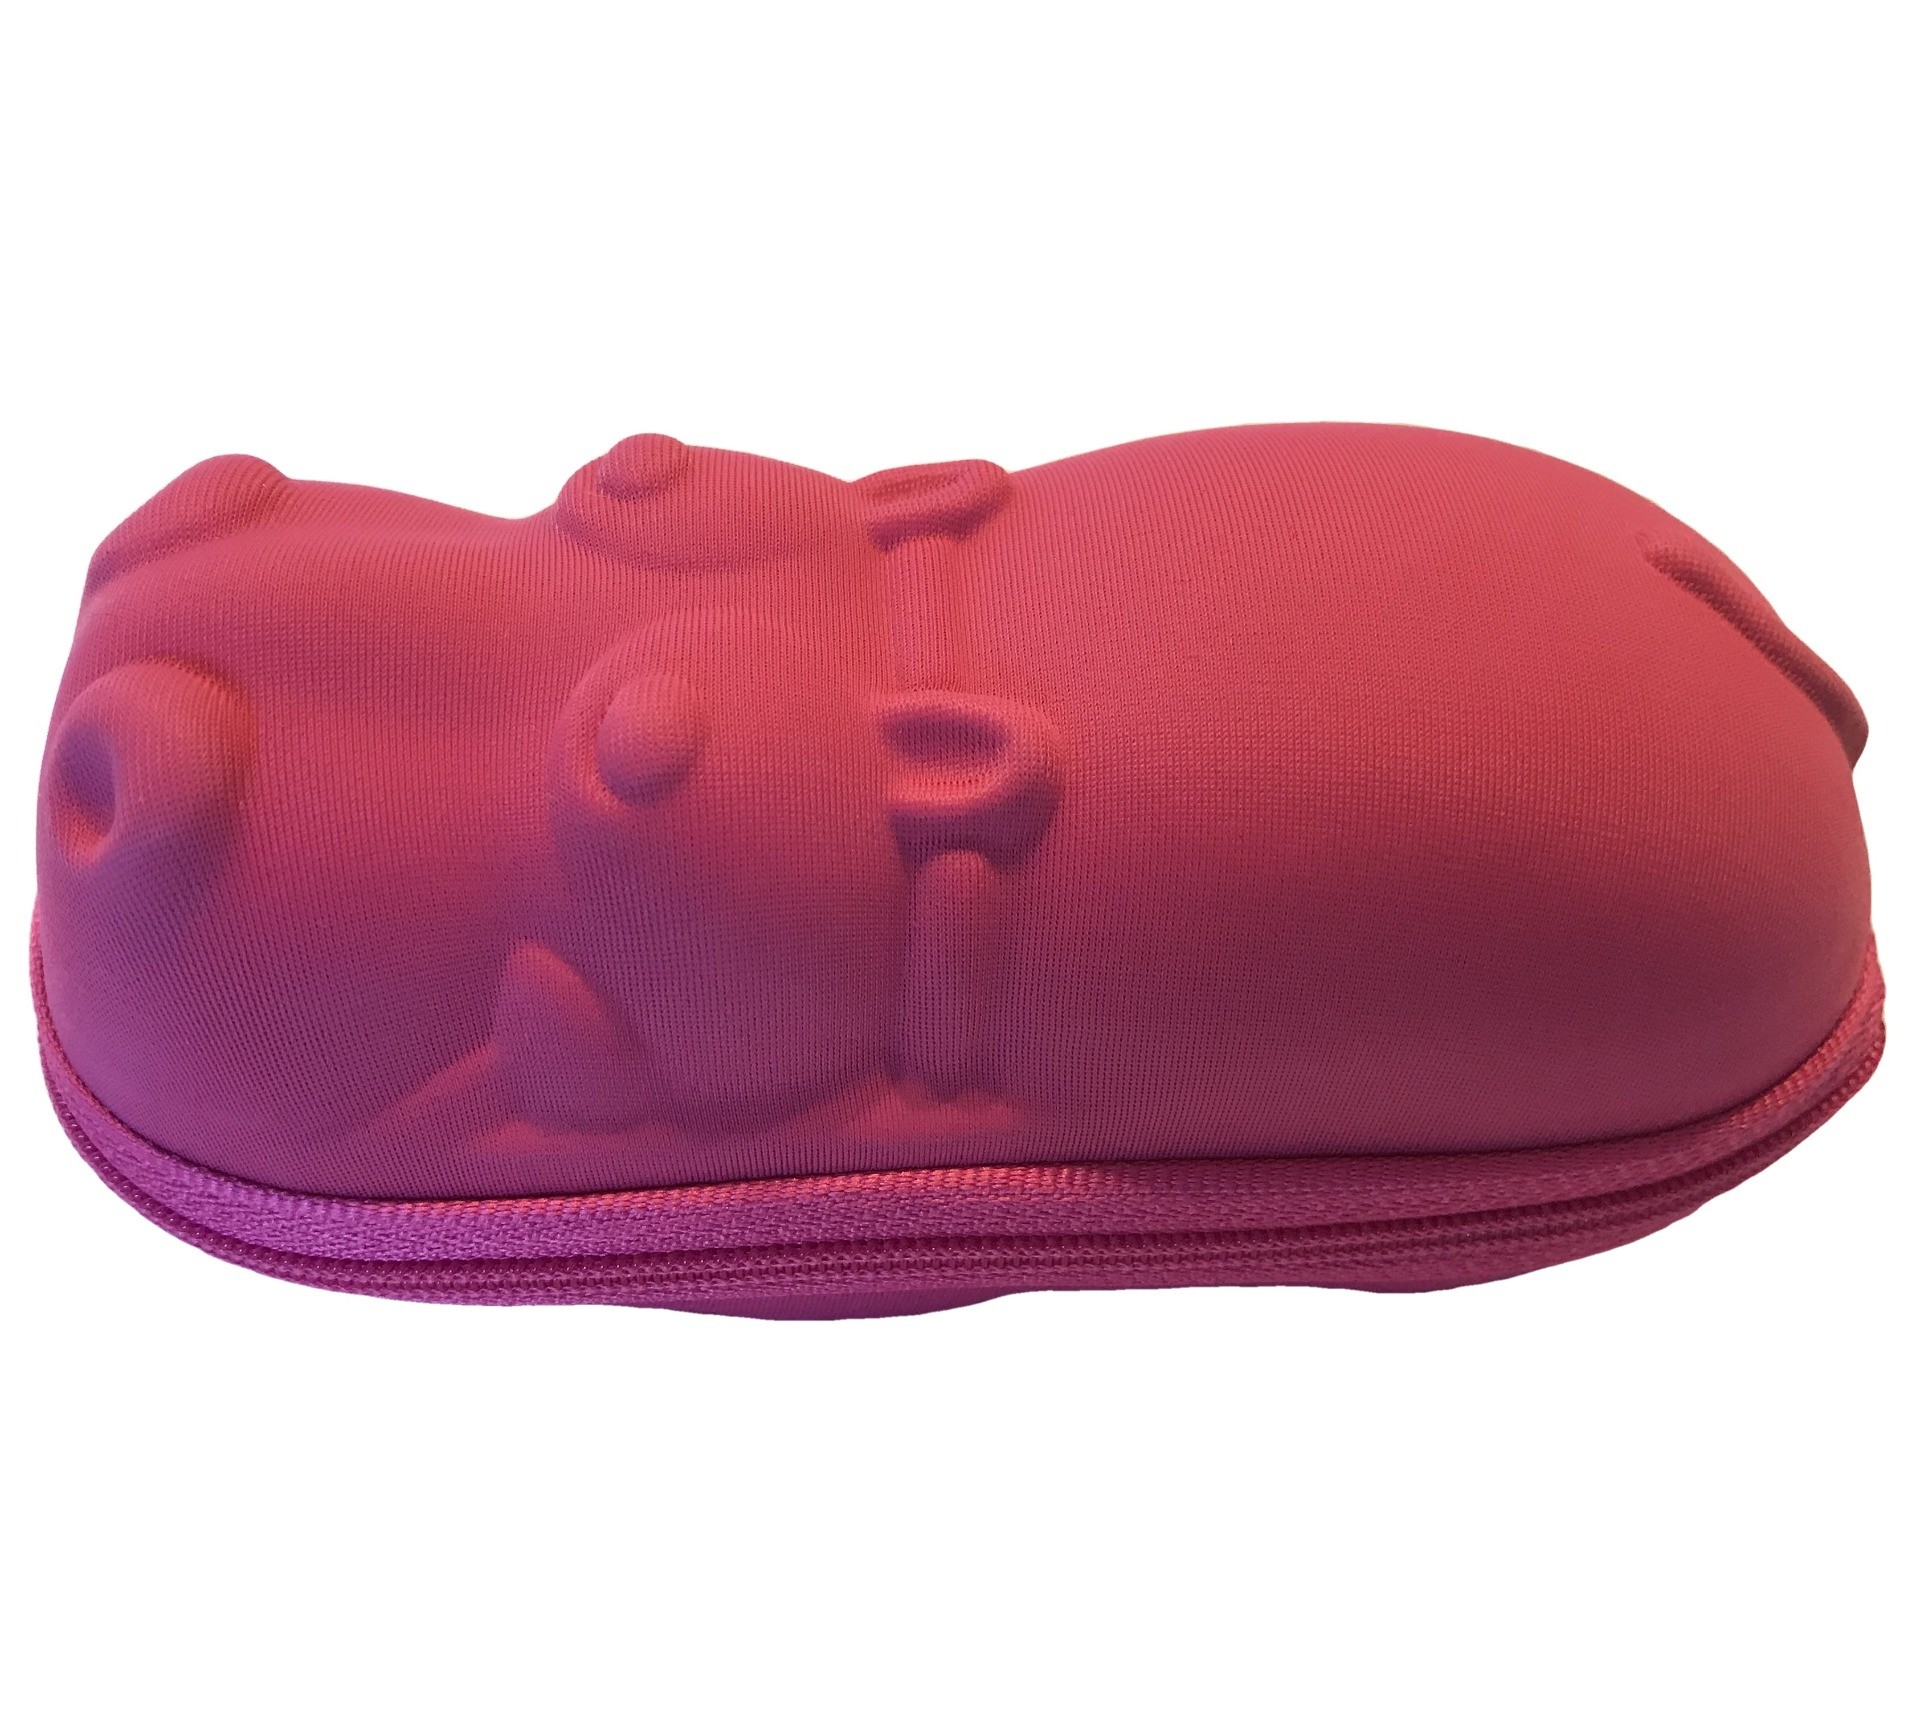 Banz - Sunglasses case for kids - Hippo - Pink